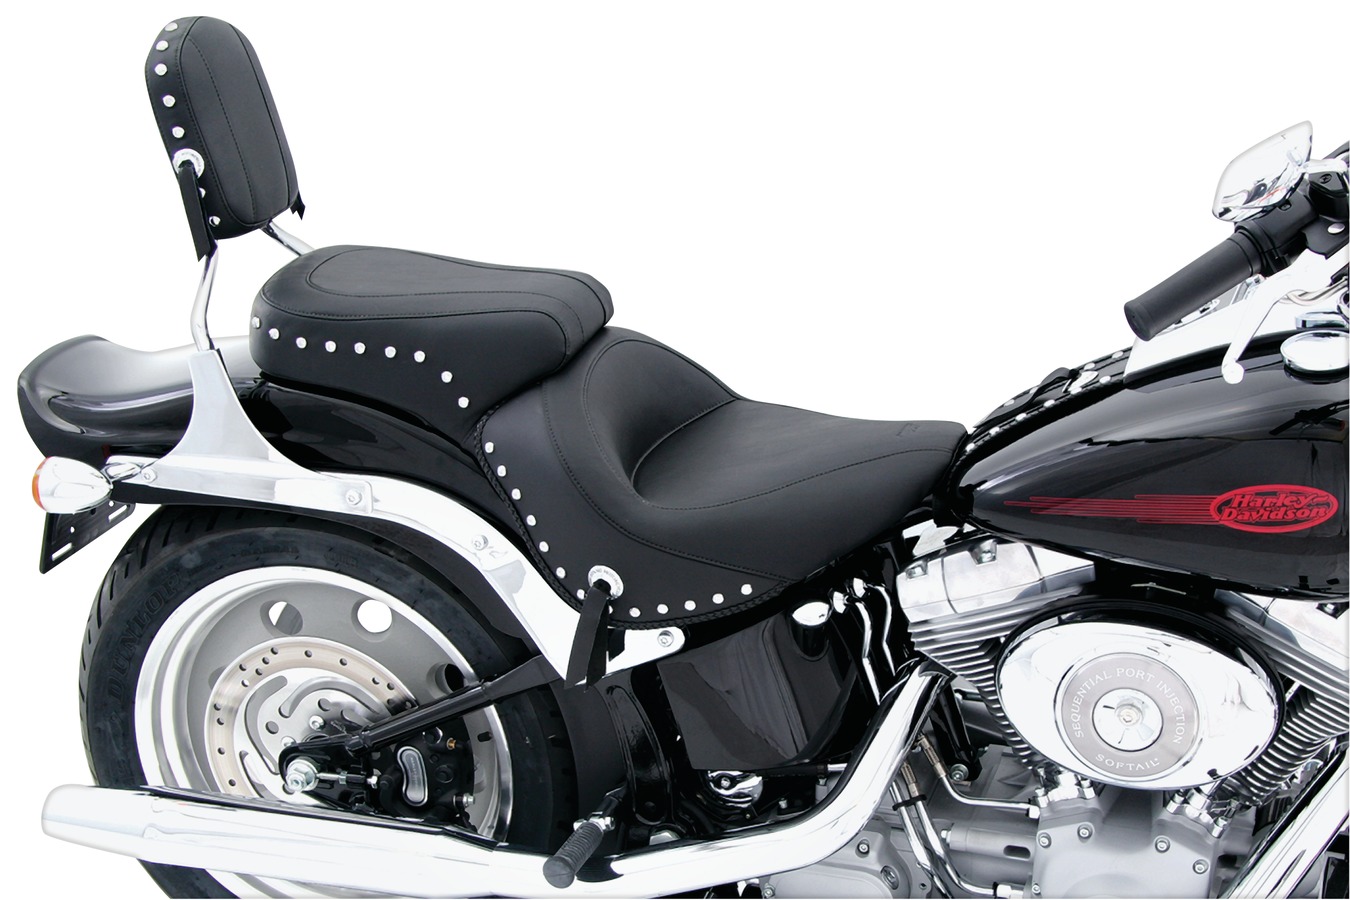 Mustang Motorcycle Seats One-Piece Vintage Seat 